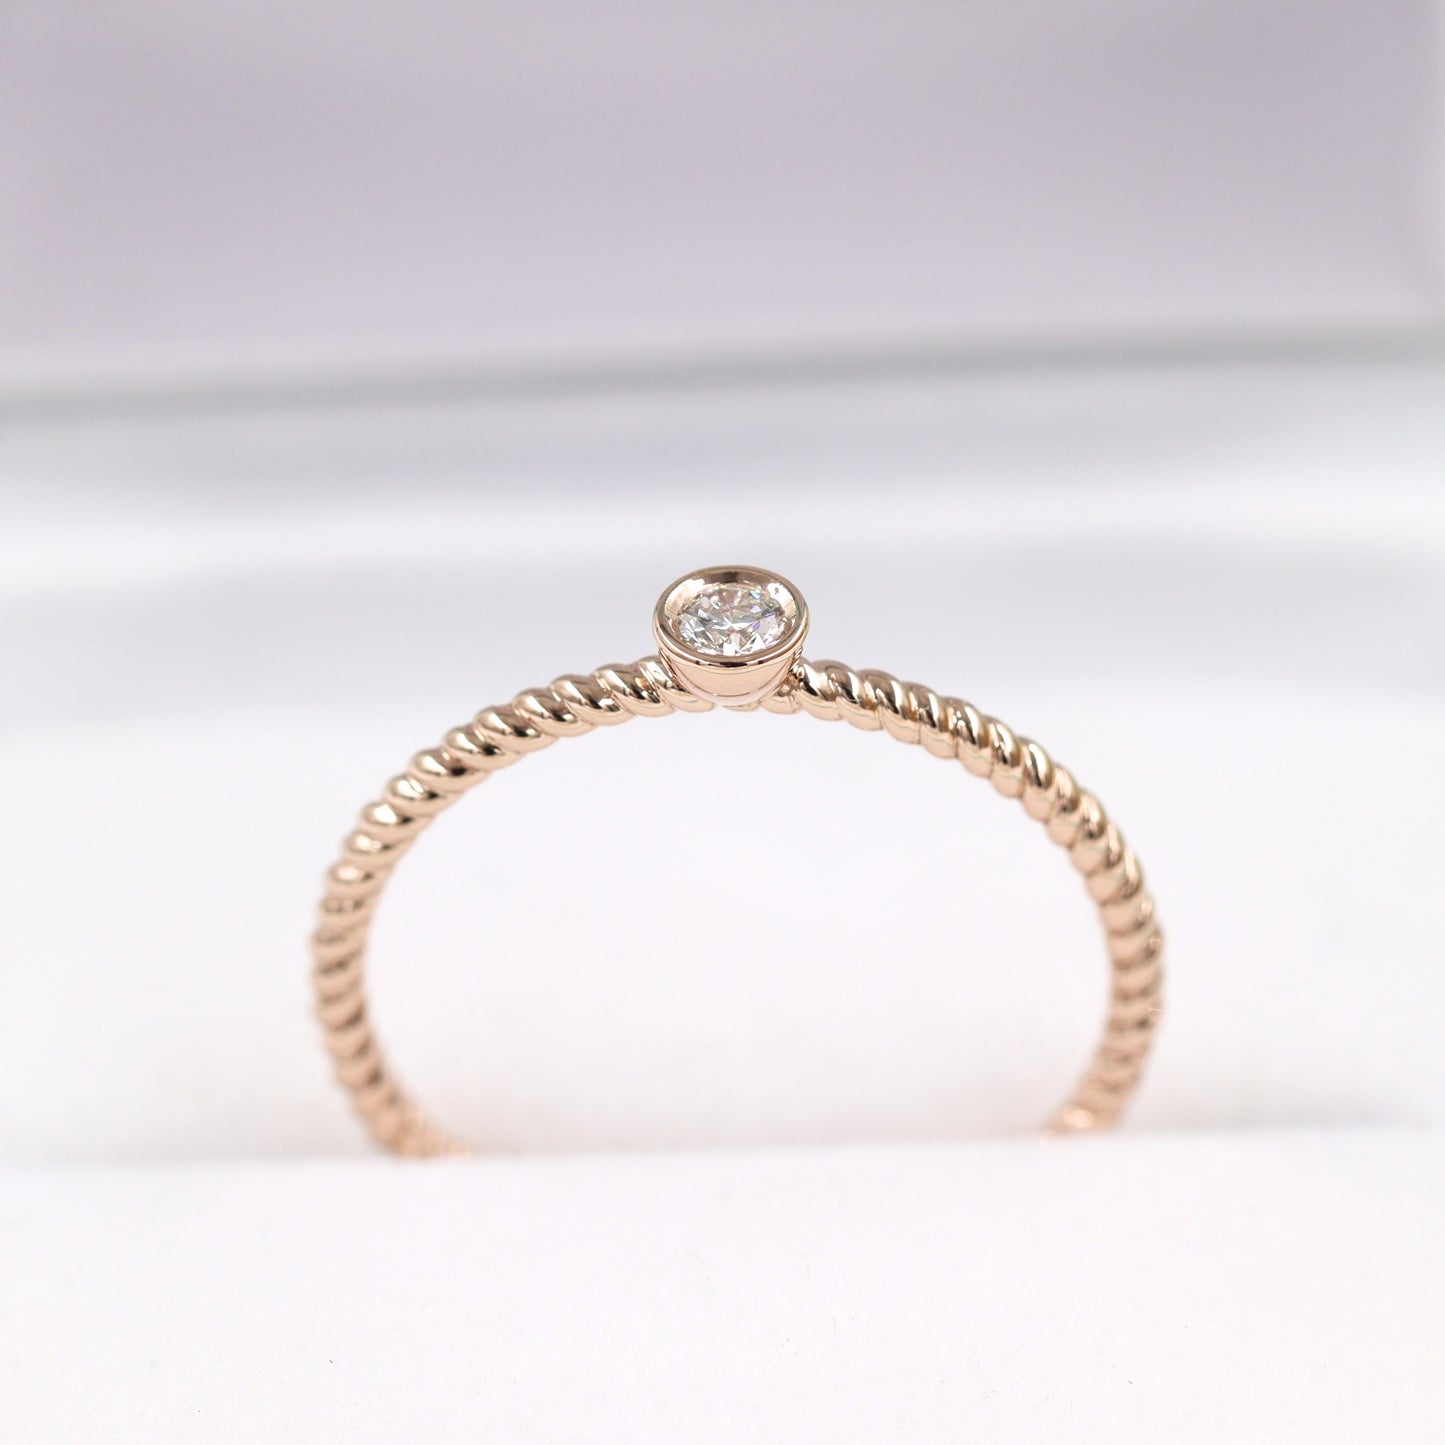 Single 0.1ct Diamond Wedding Ring/14K Gold Natural Diamond Ring/Simple Engagement Ring / Stackable Round Bezel Band/Twist Dainty Ring/Gift for her